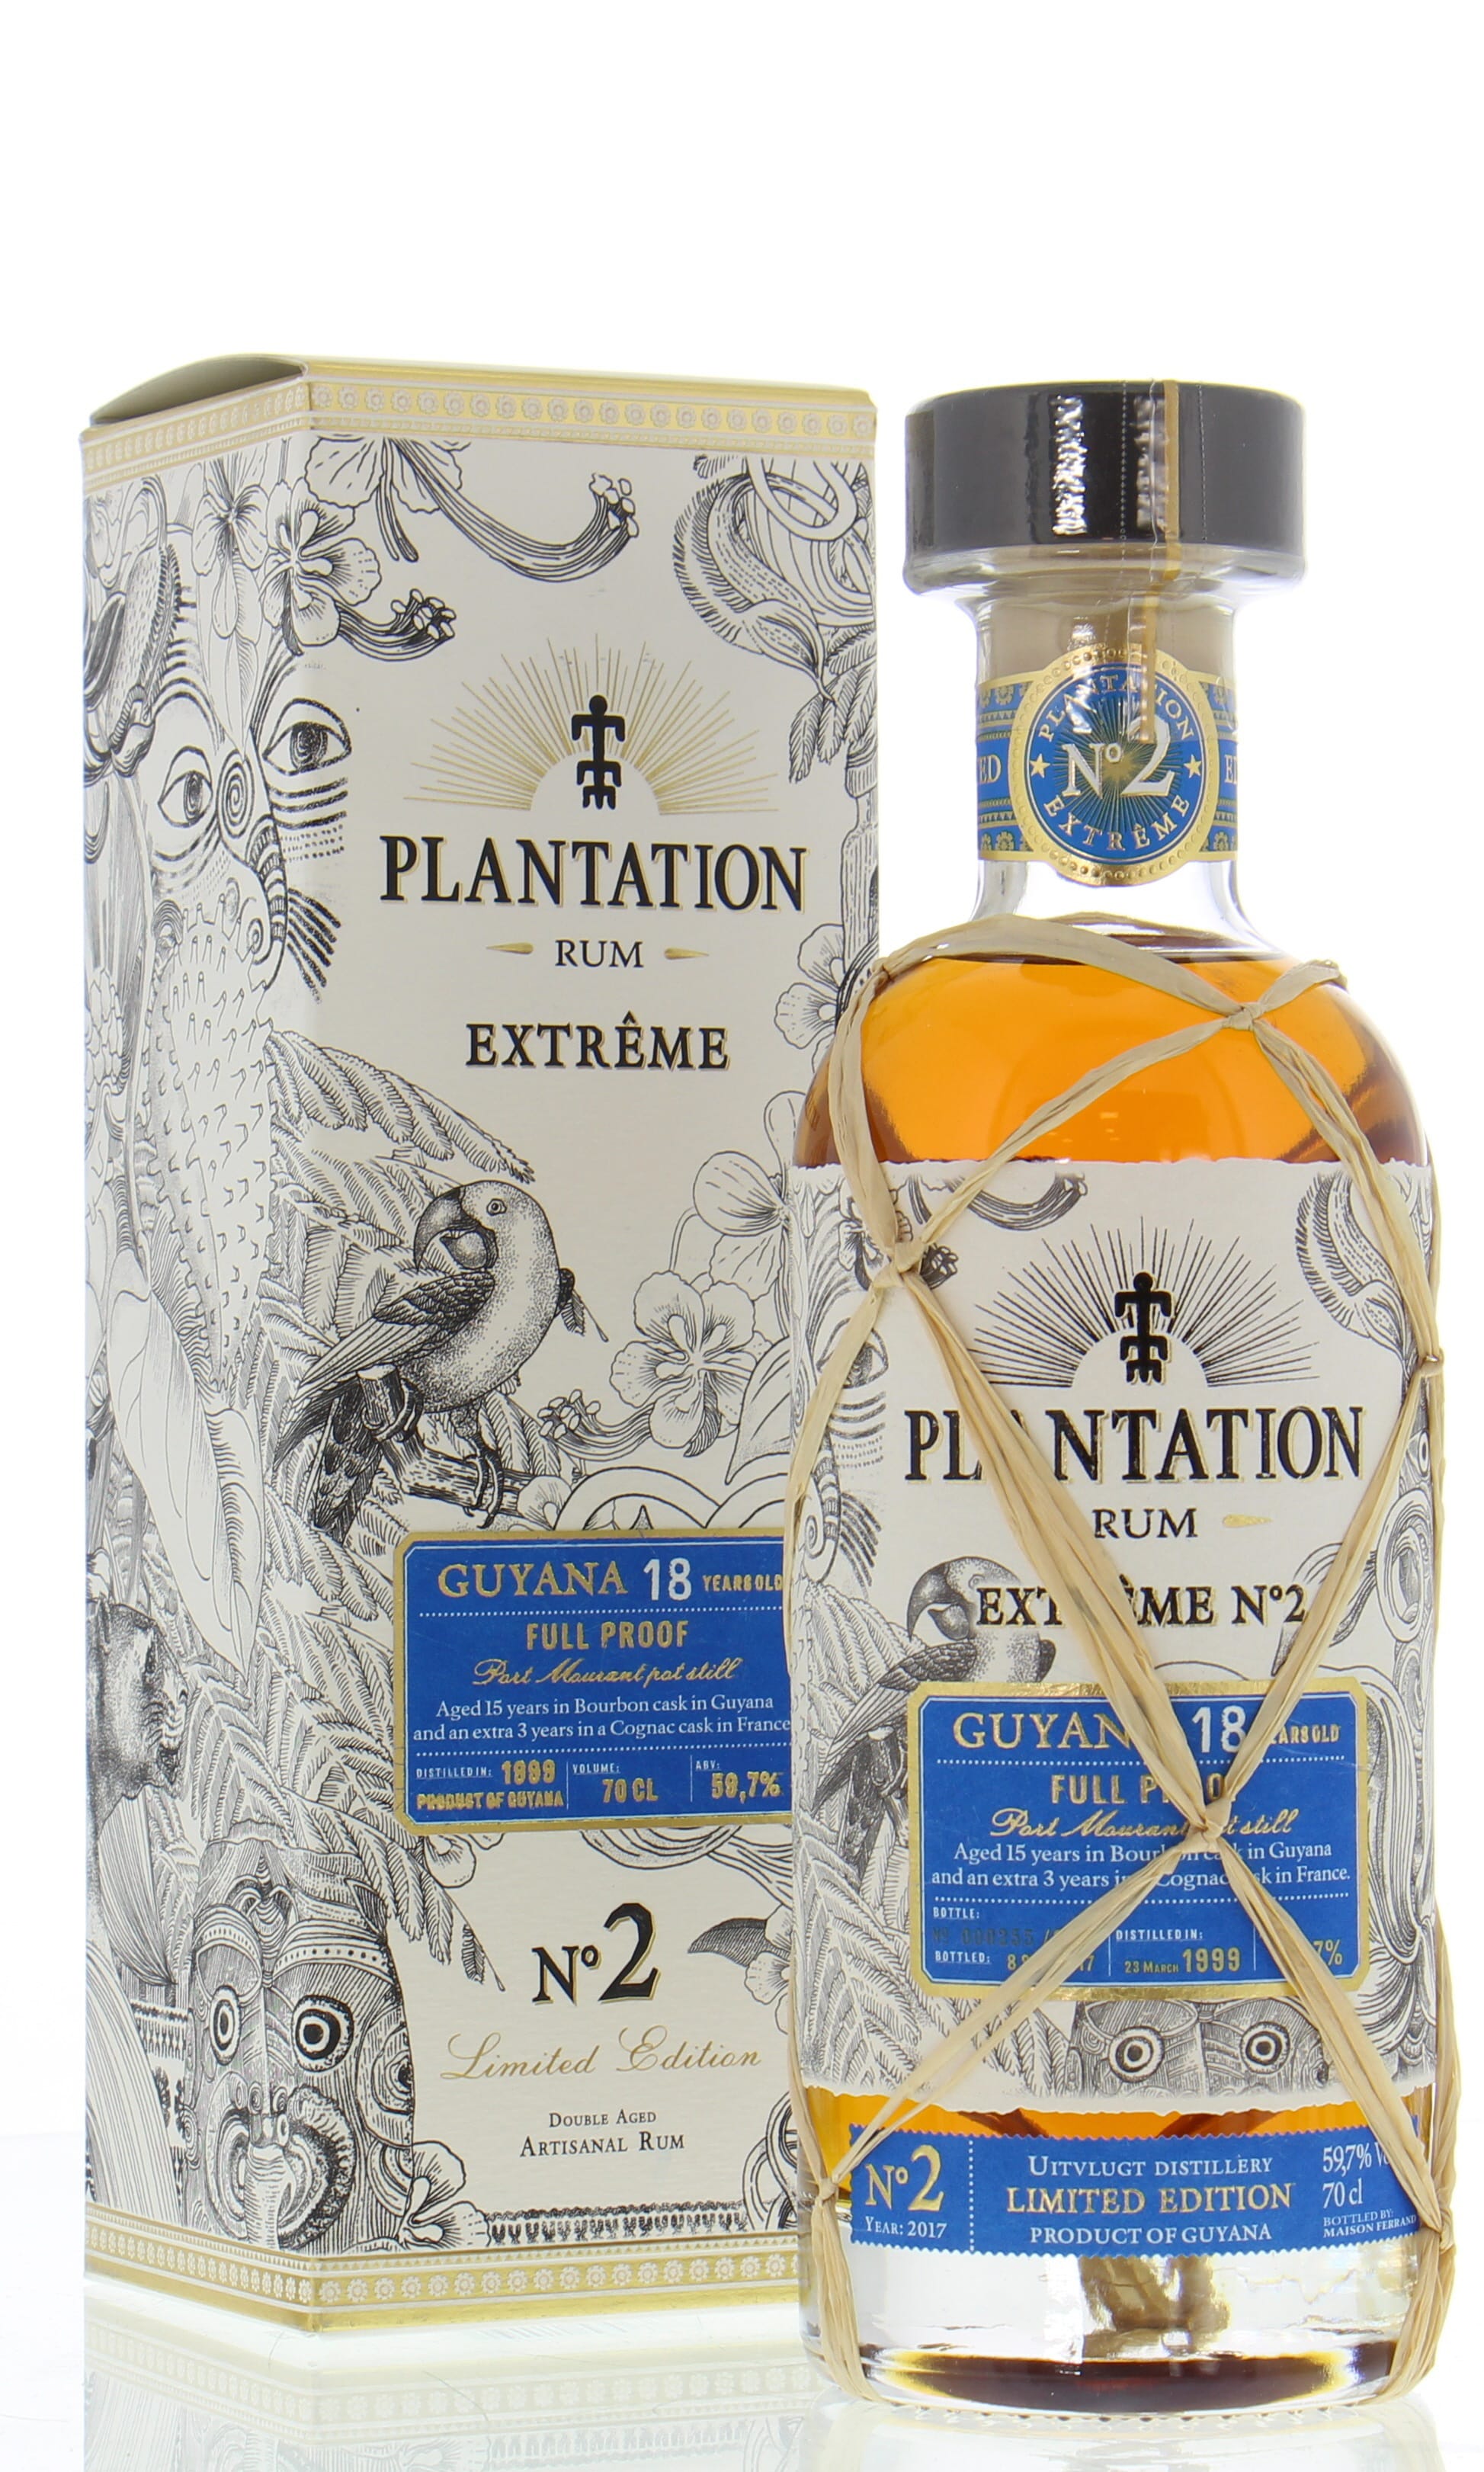 Plantation Rum - Uitvlugt 18 Years Old Guyana Extreme No2 Limited Edition 59.7% 1999